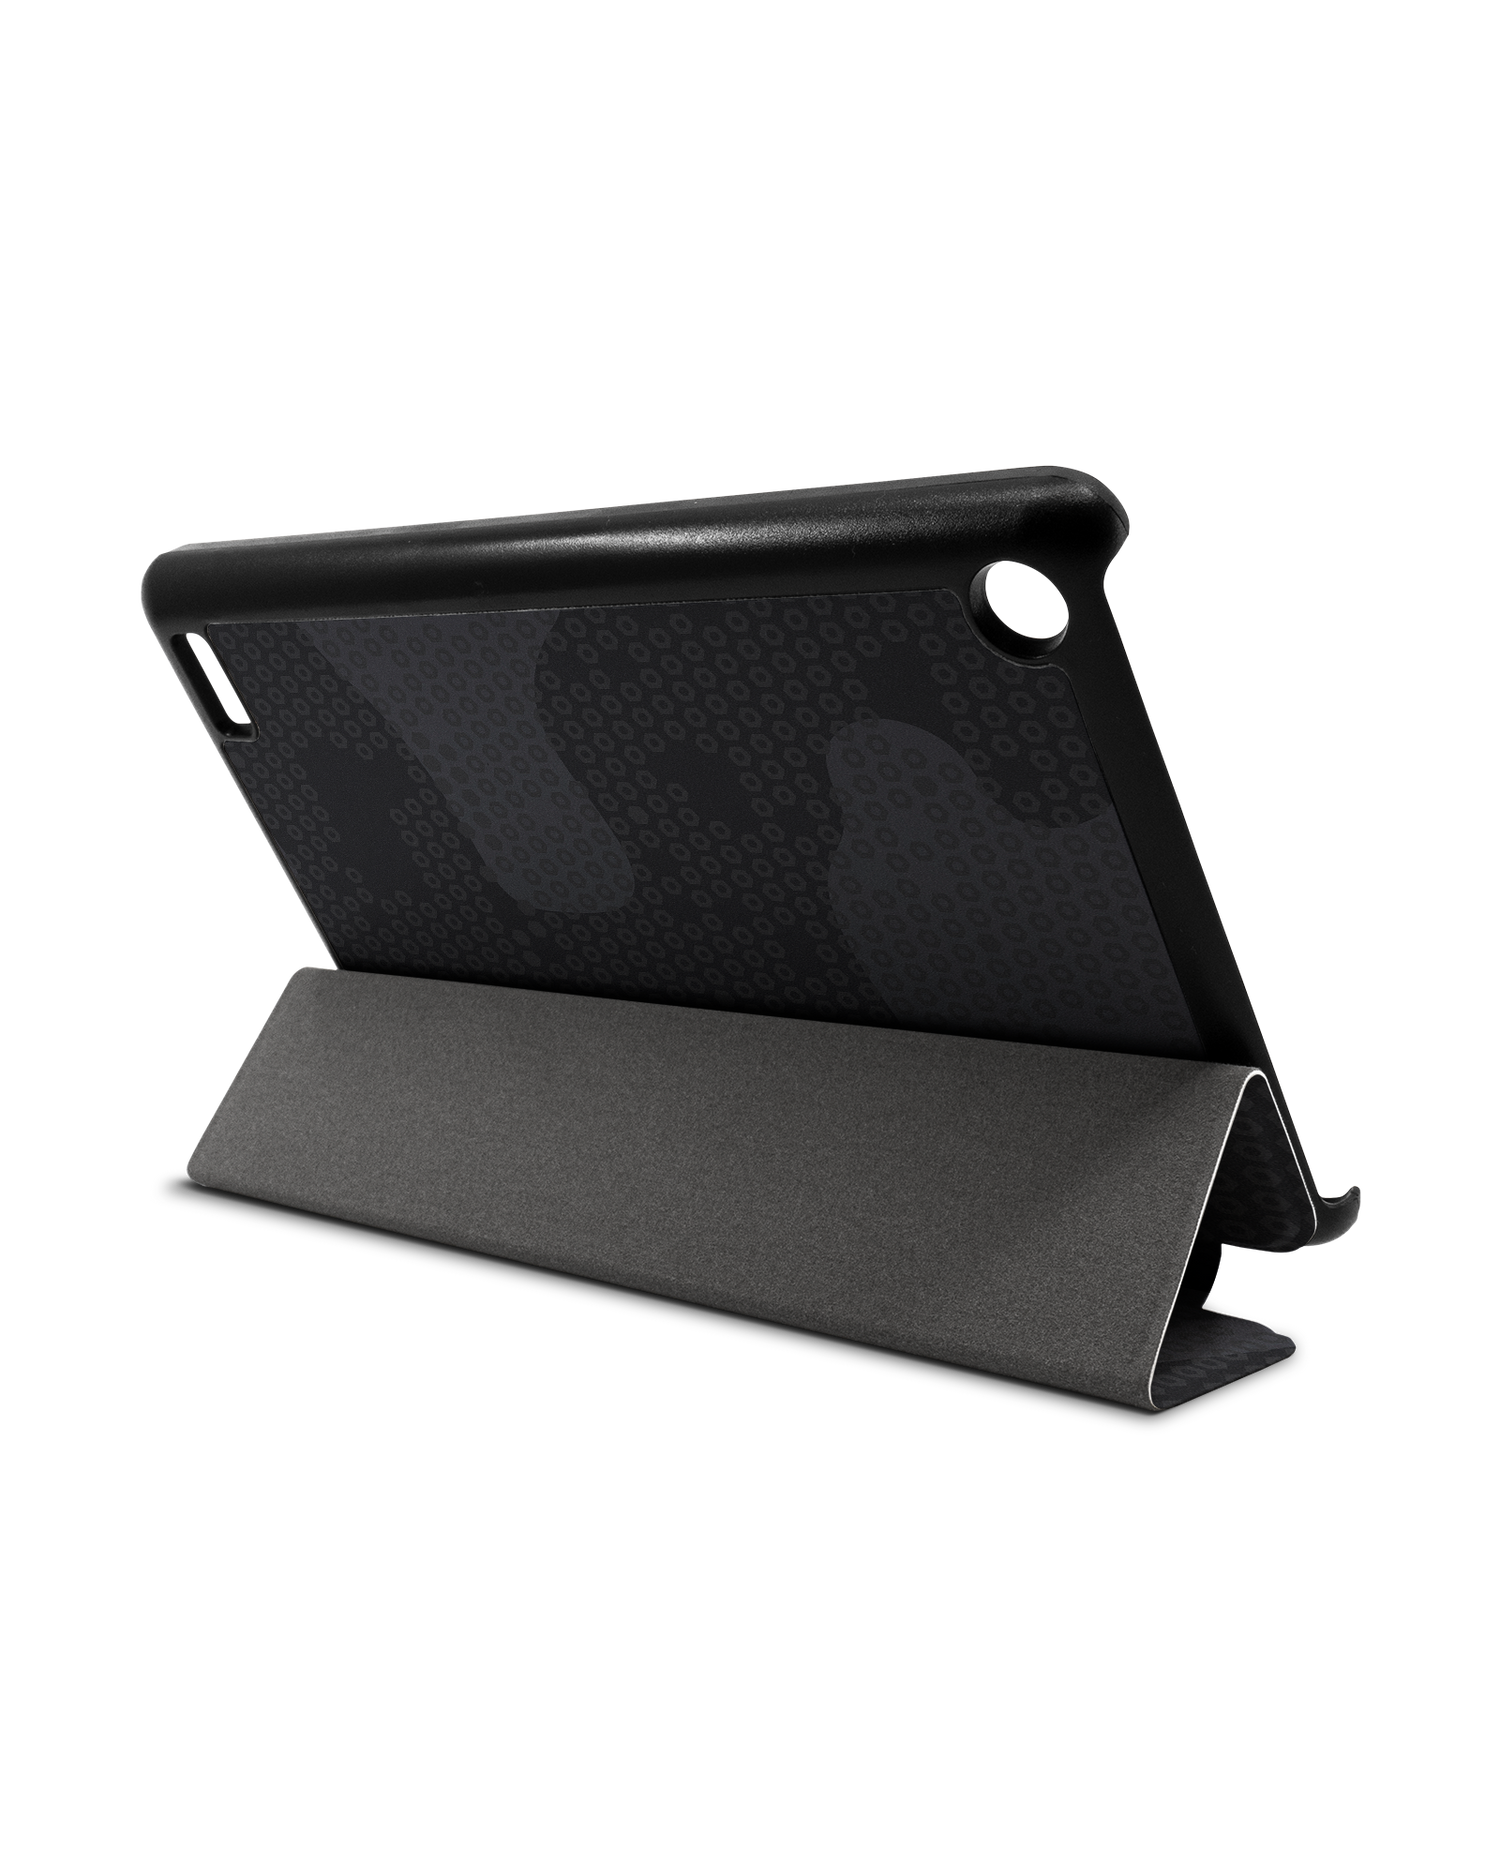 Spec Ops Dark Tablet Smart Case for Amazon Fire 7: Used as Stand